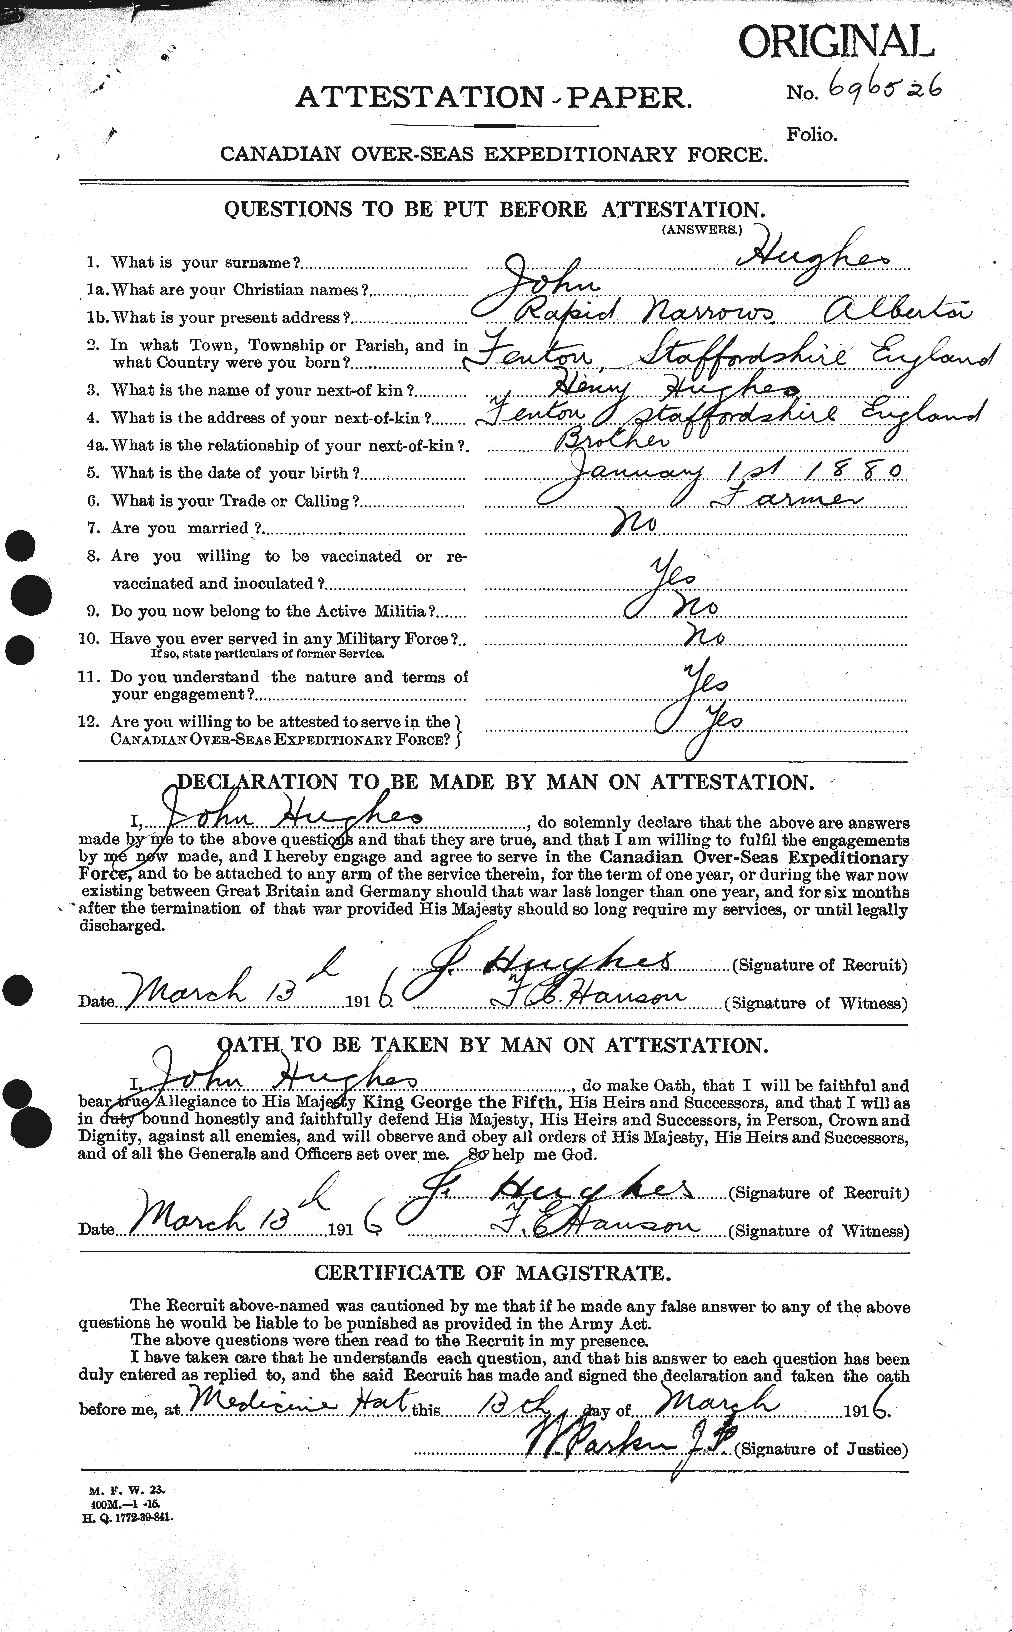 Personnel Records of the First World War - CEF 403998a